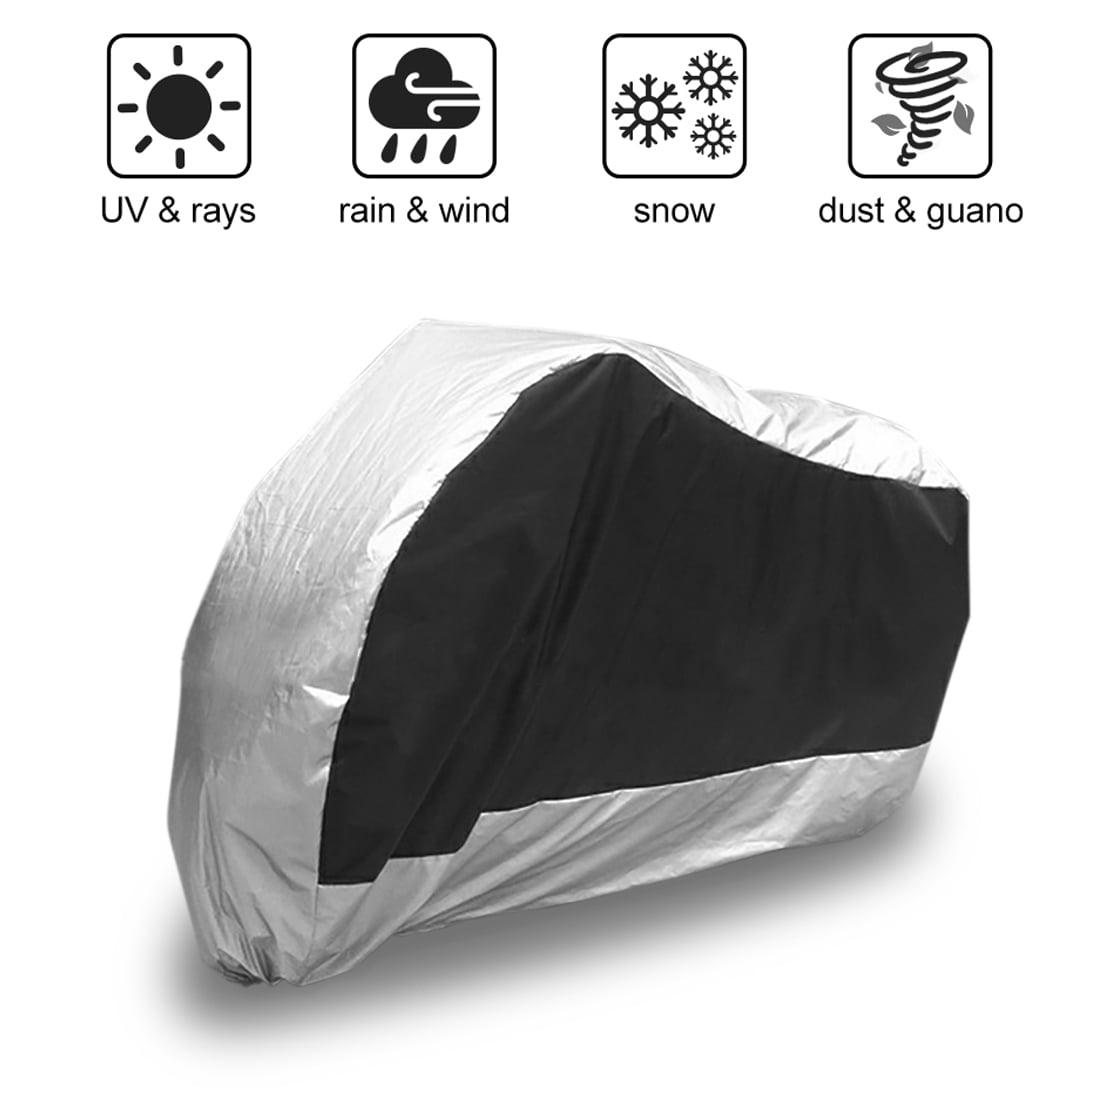 SUPER HEAVY-DUTY MOTORCYCLE COVER FOR Harley-Davidson Street Glide 2006-2016 